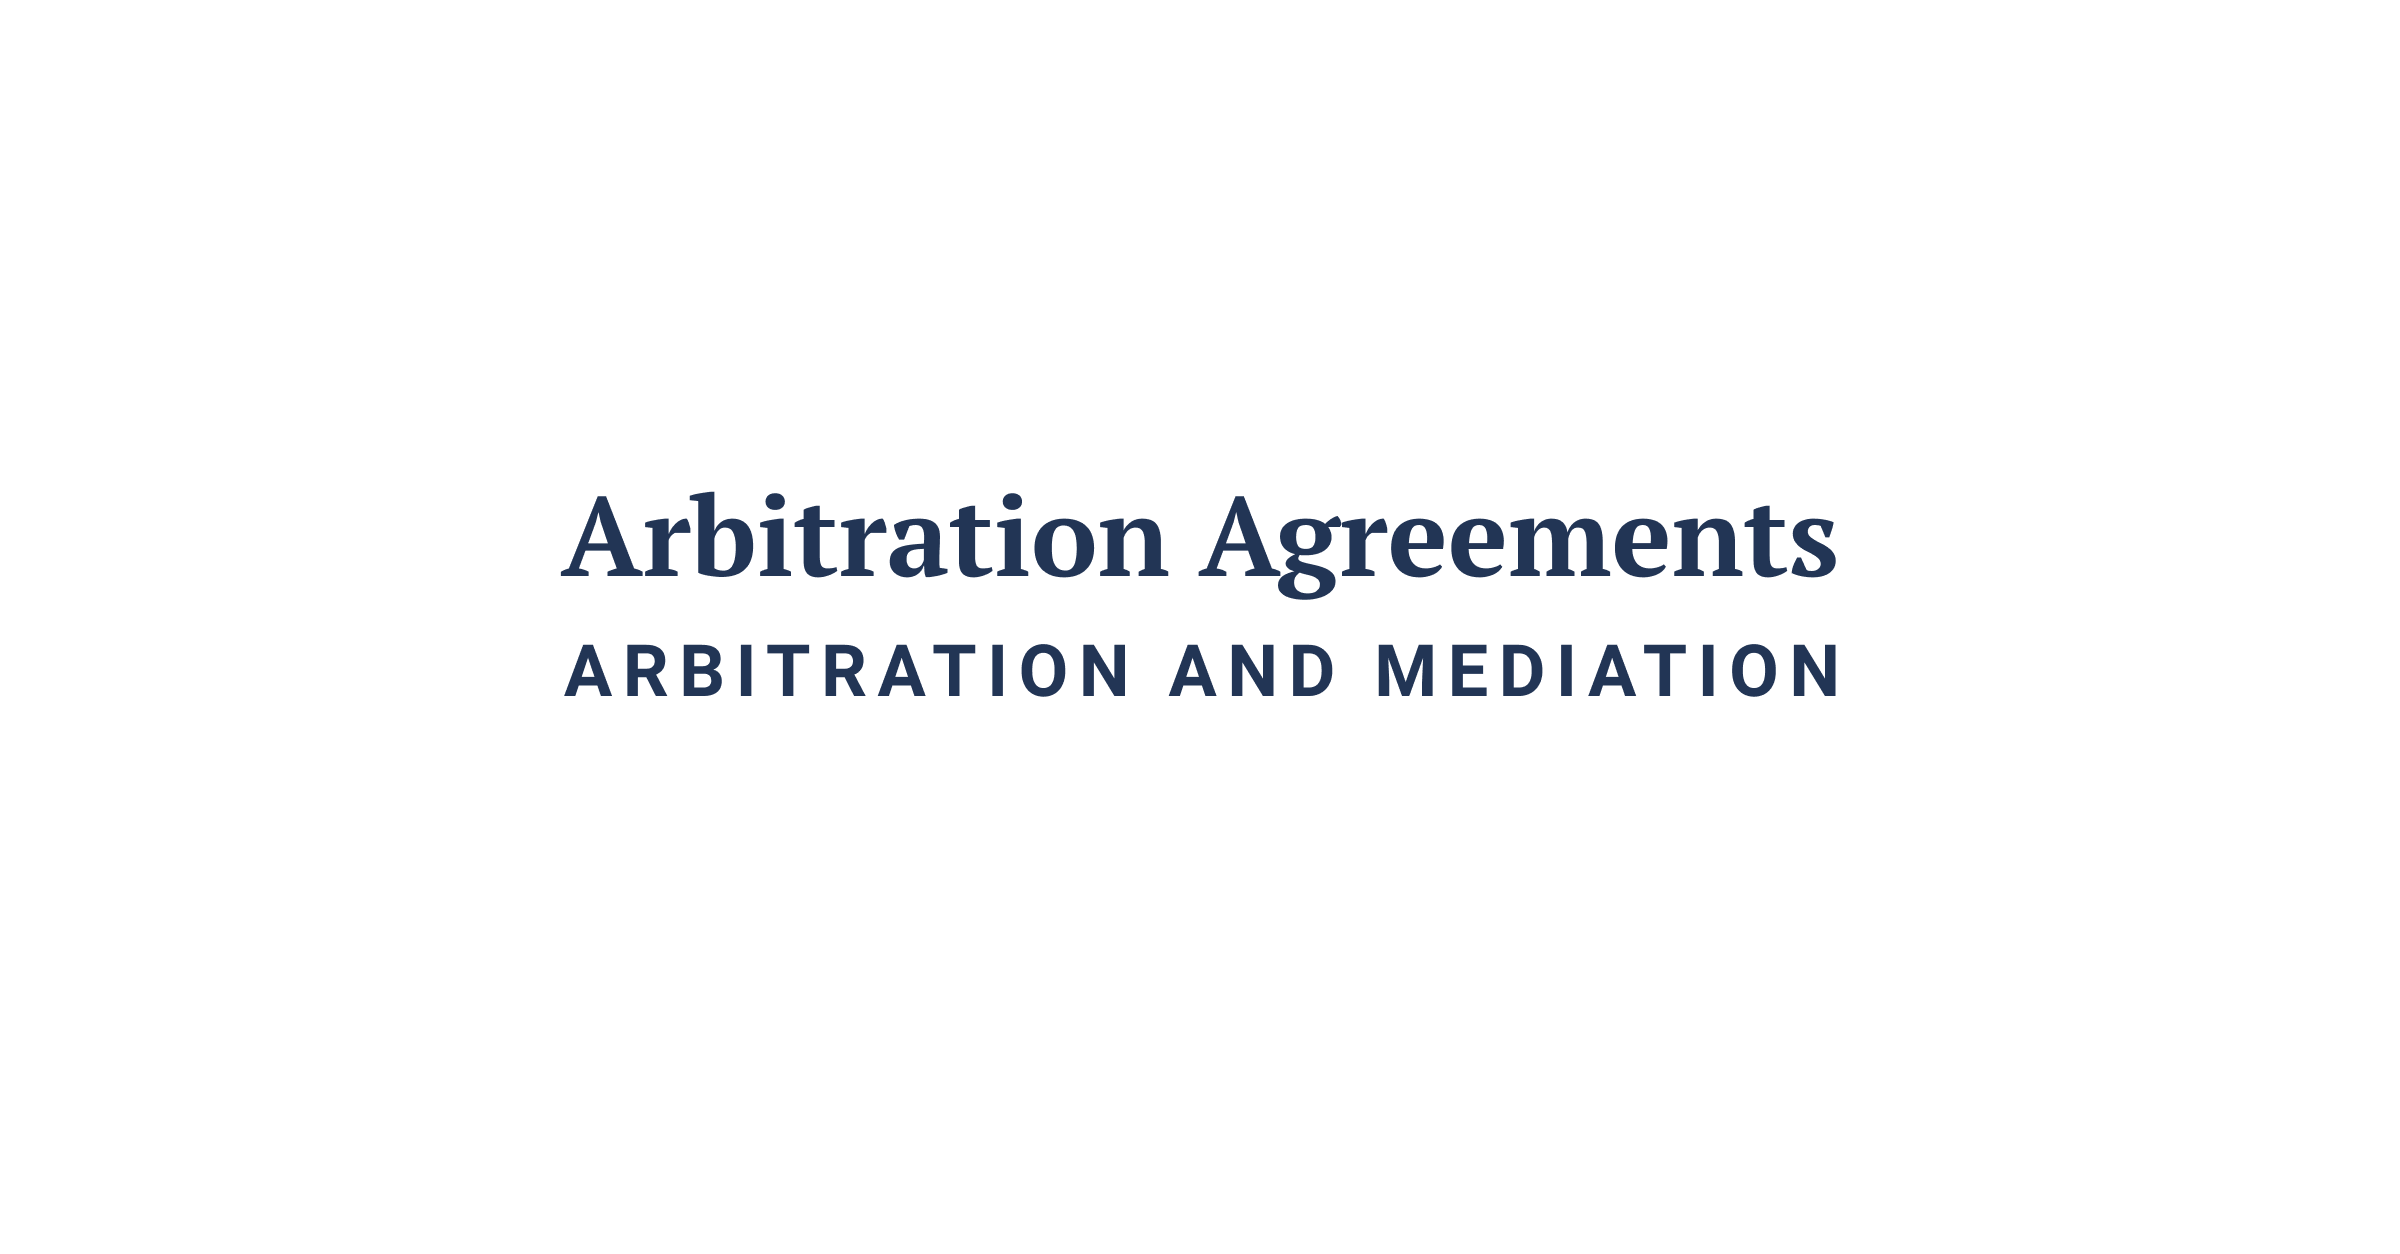 Why Choose ArbitrationAgreements.org?